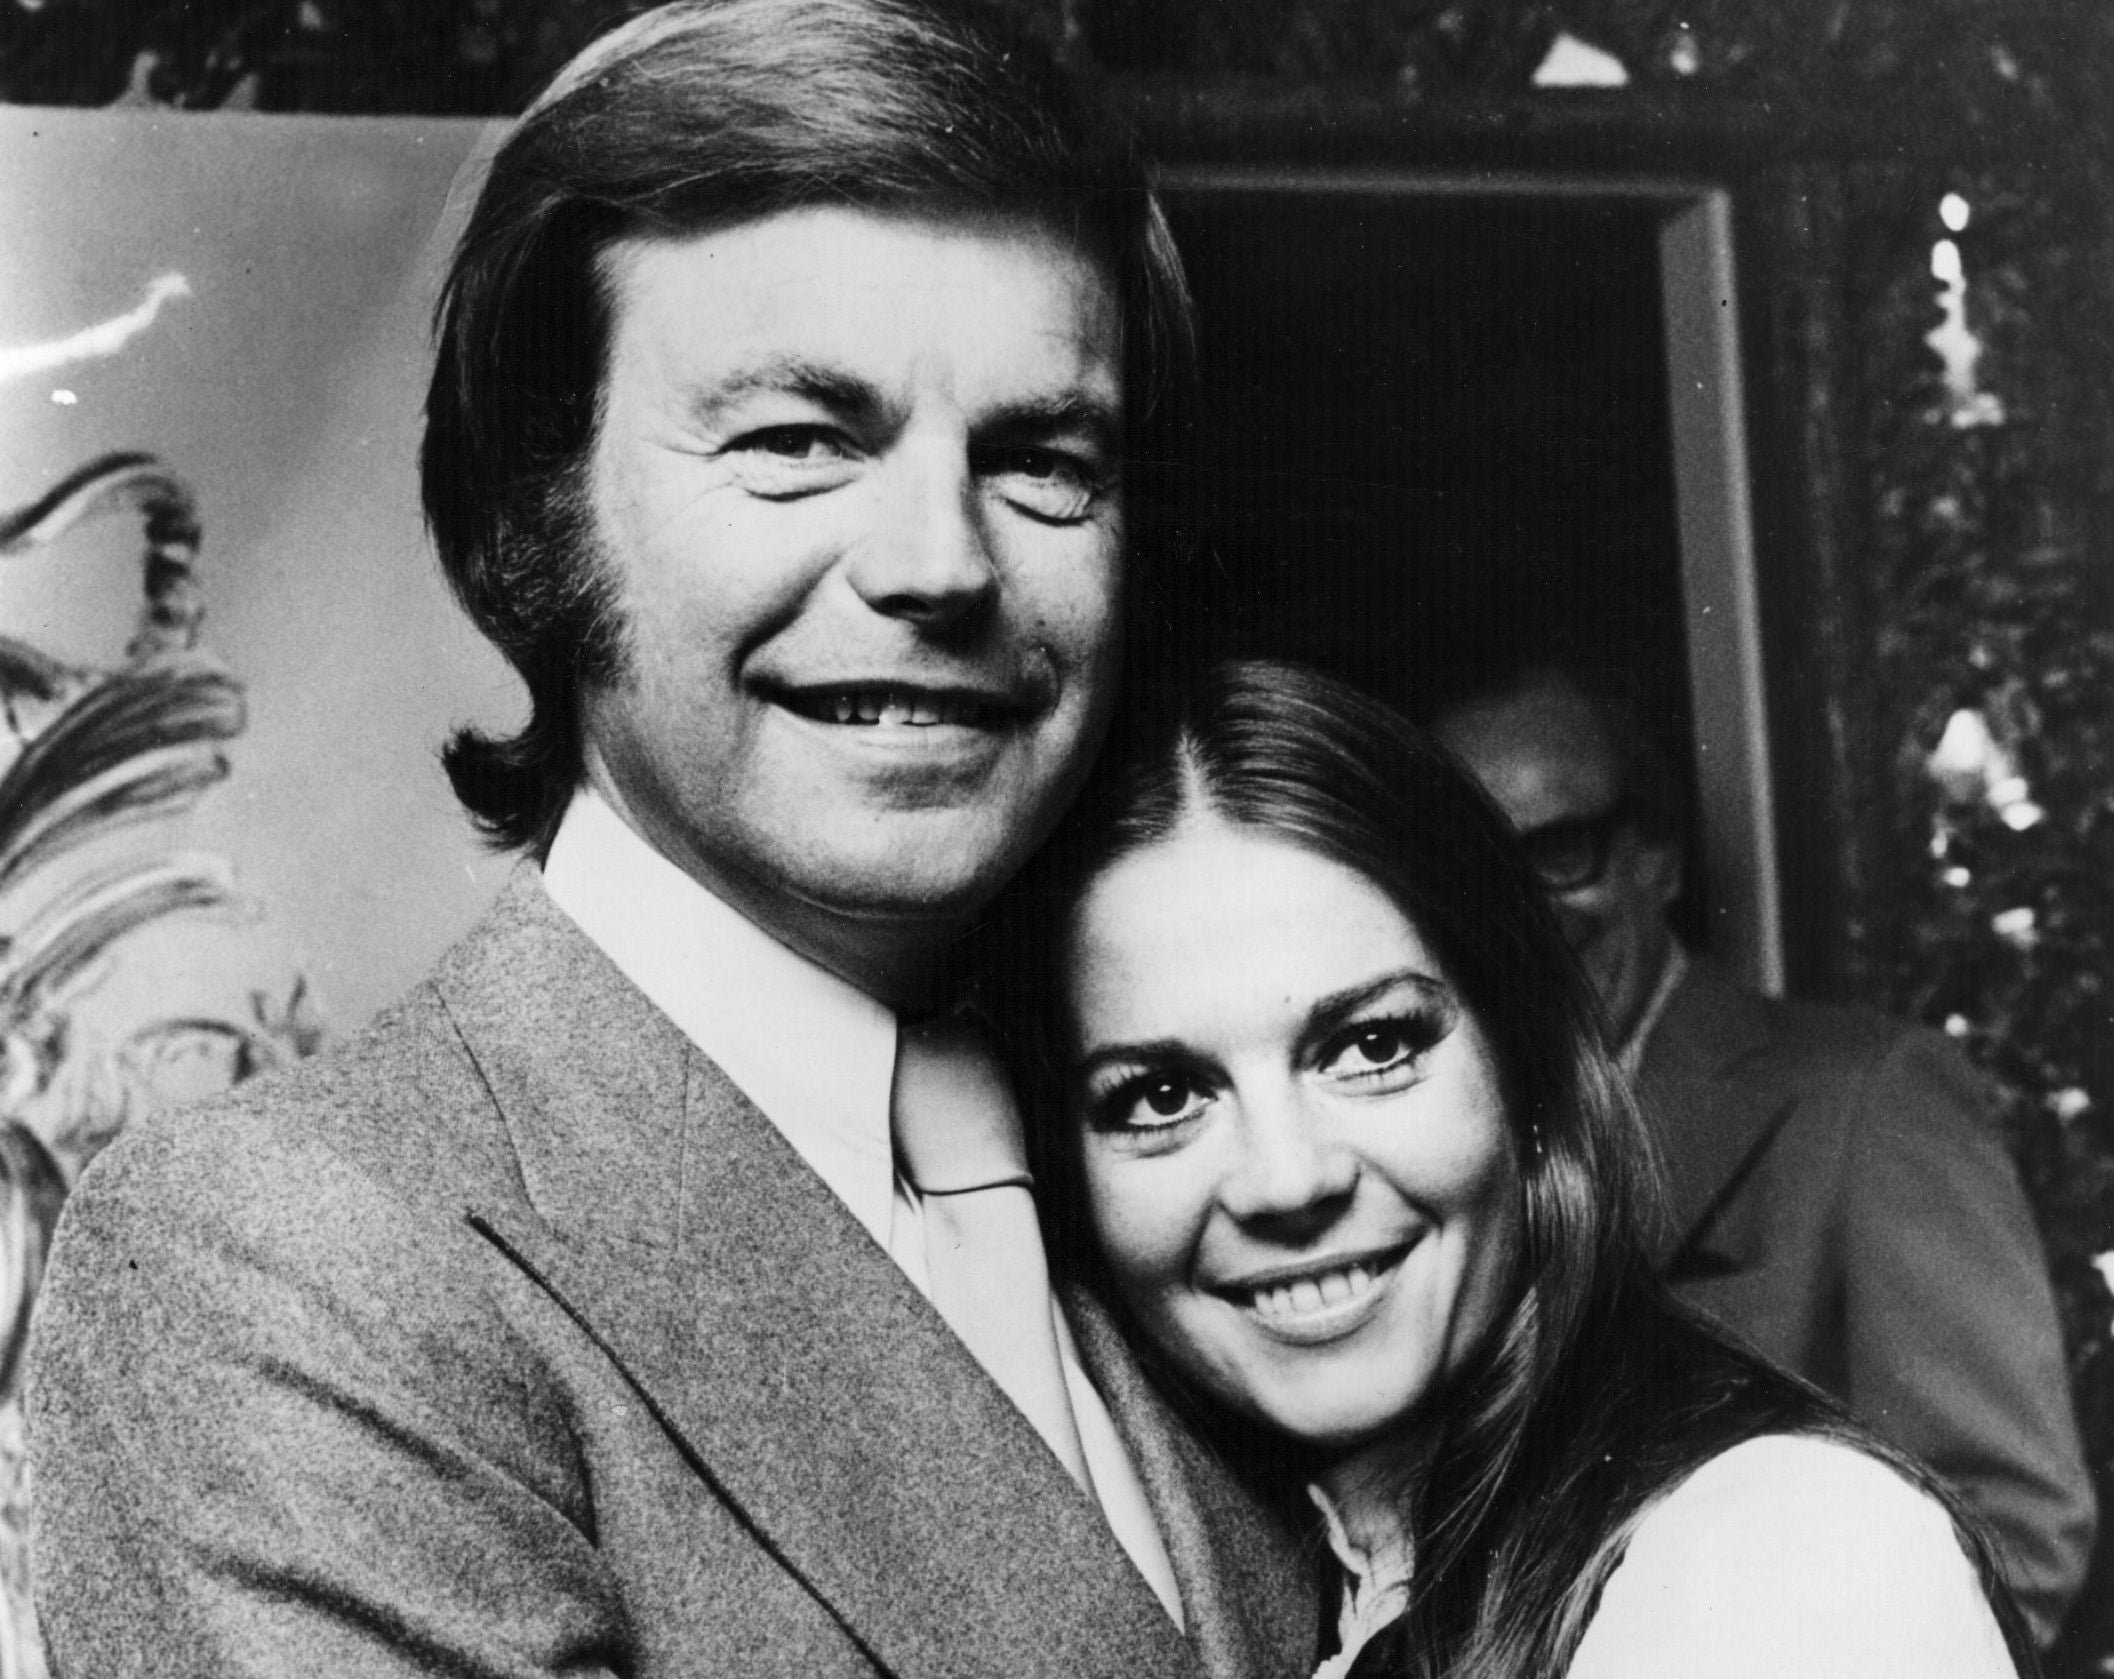 Robert Wagner speaks of the shattering loss he felt after his wife Natalie Wood died 35 years ago The Independent The Independent pic